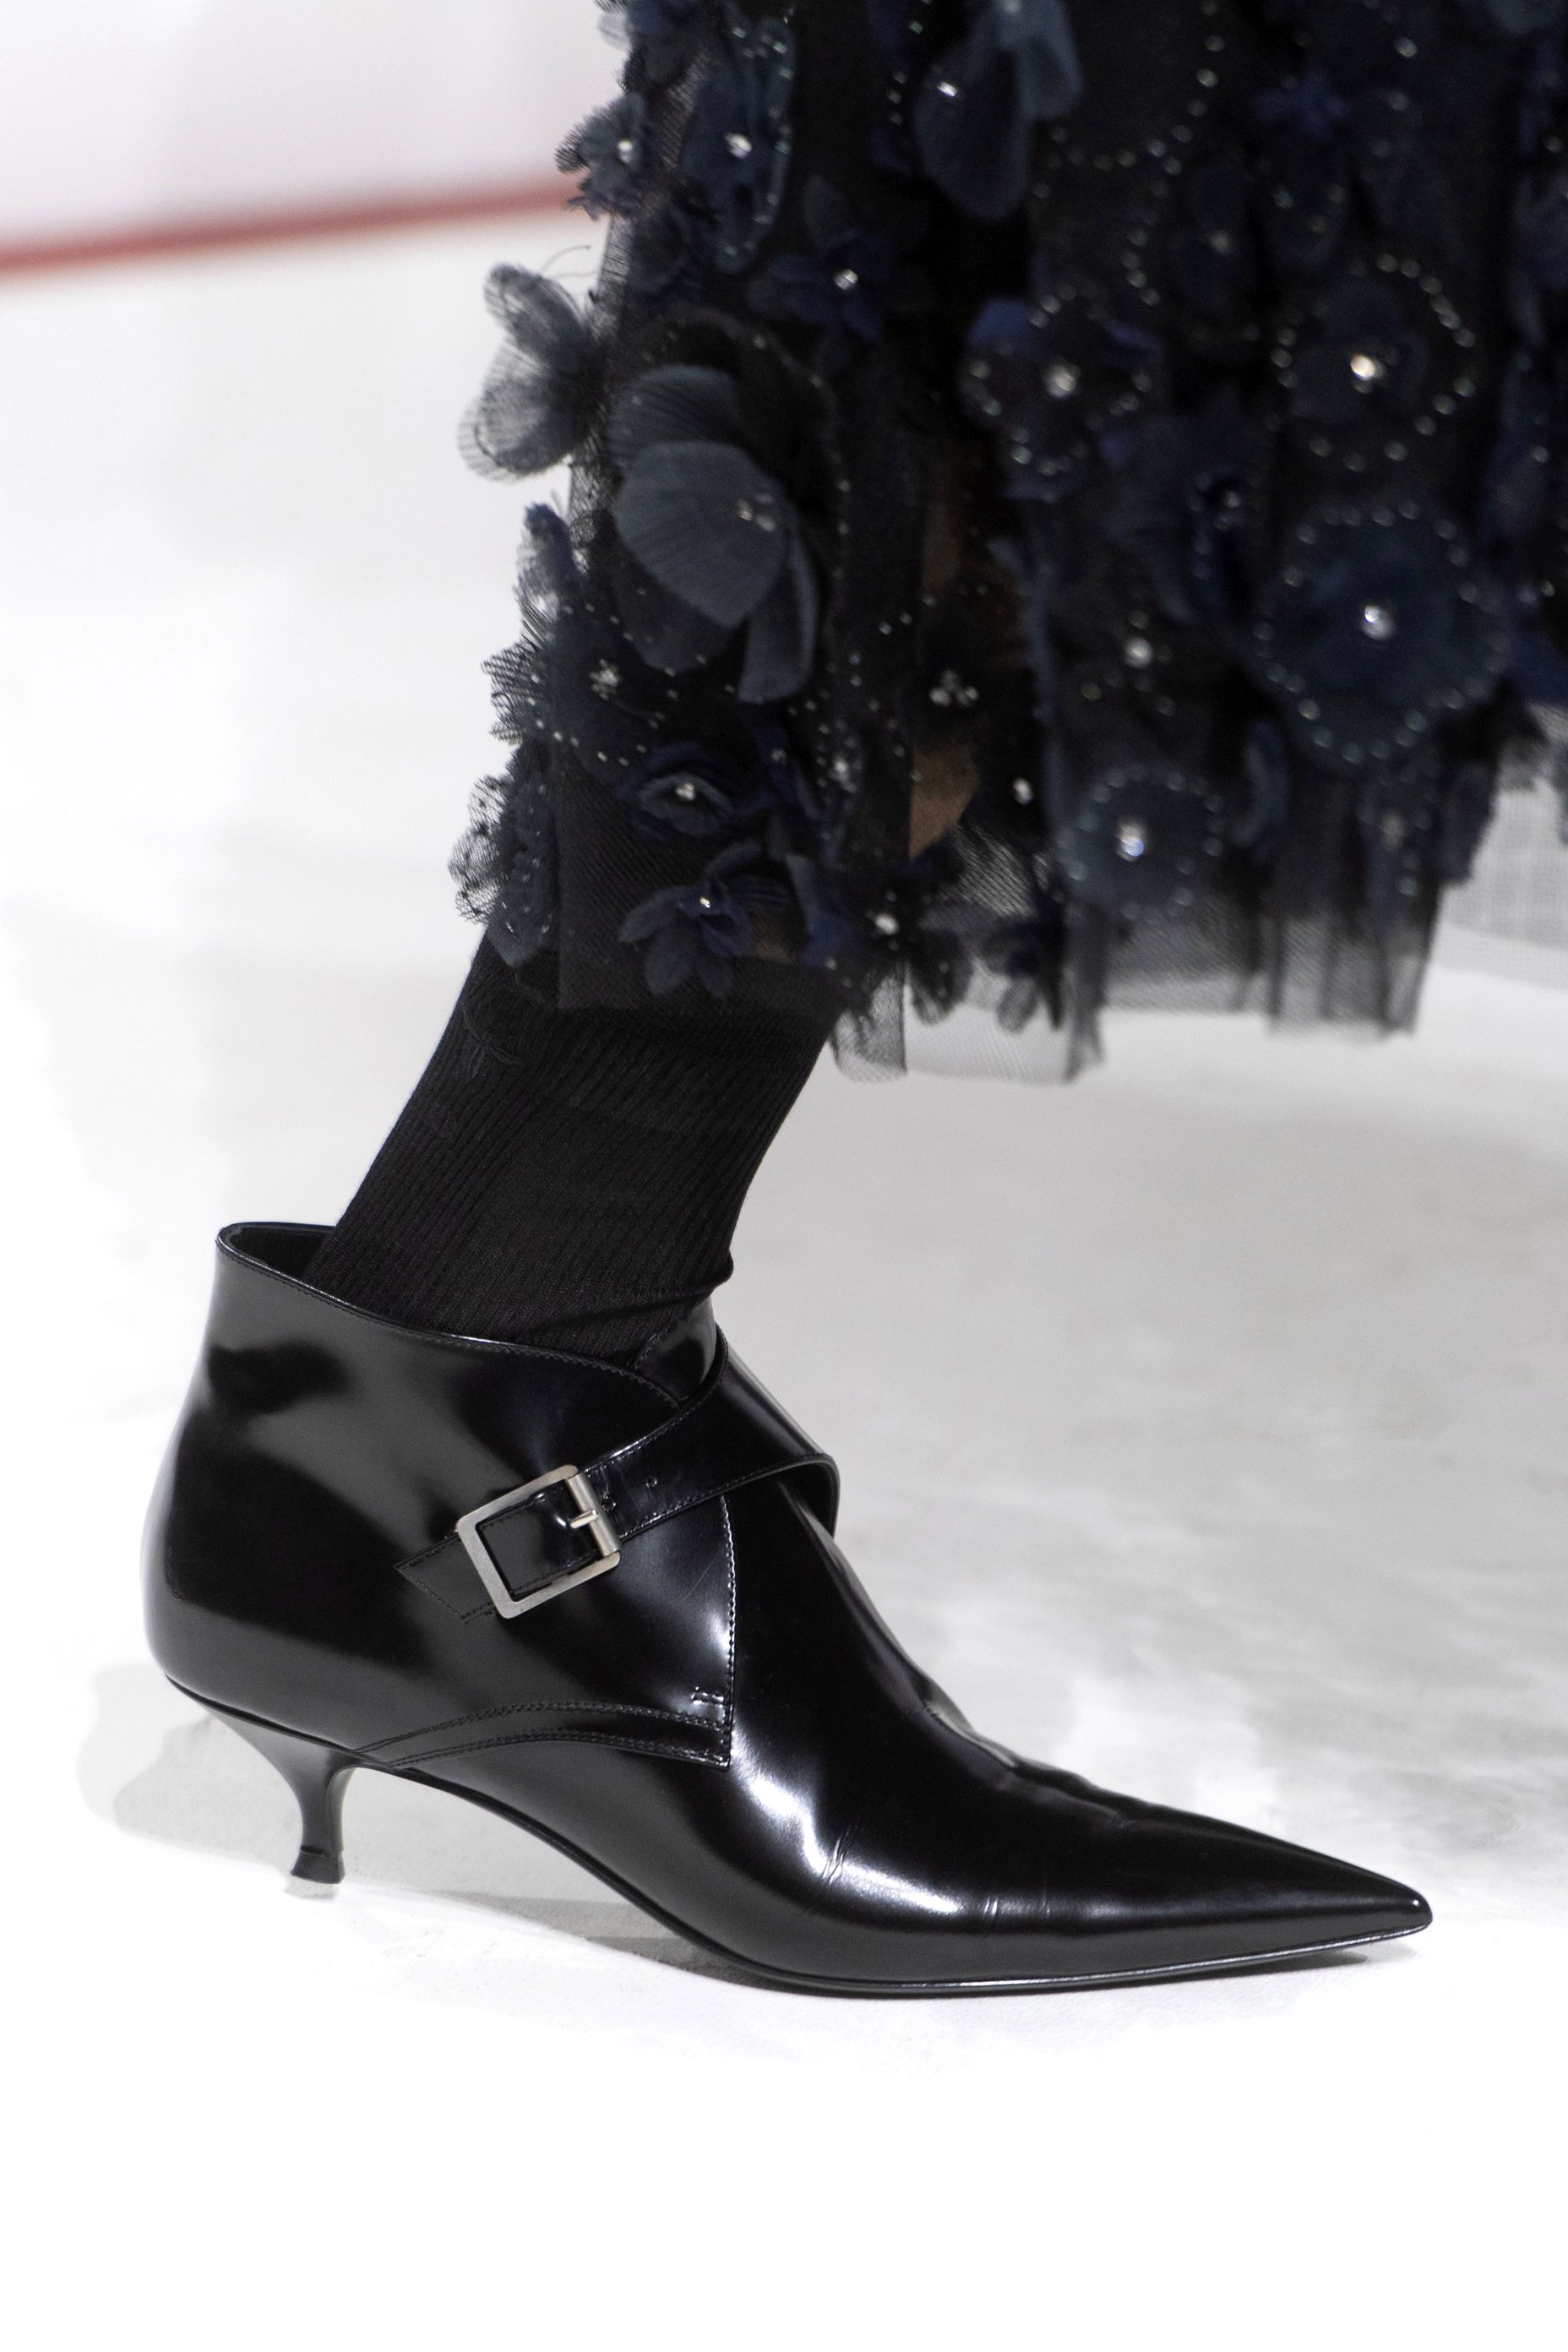 aw19 shoe trends